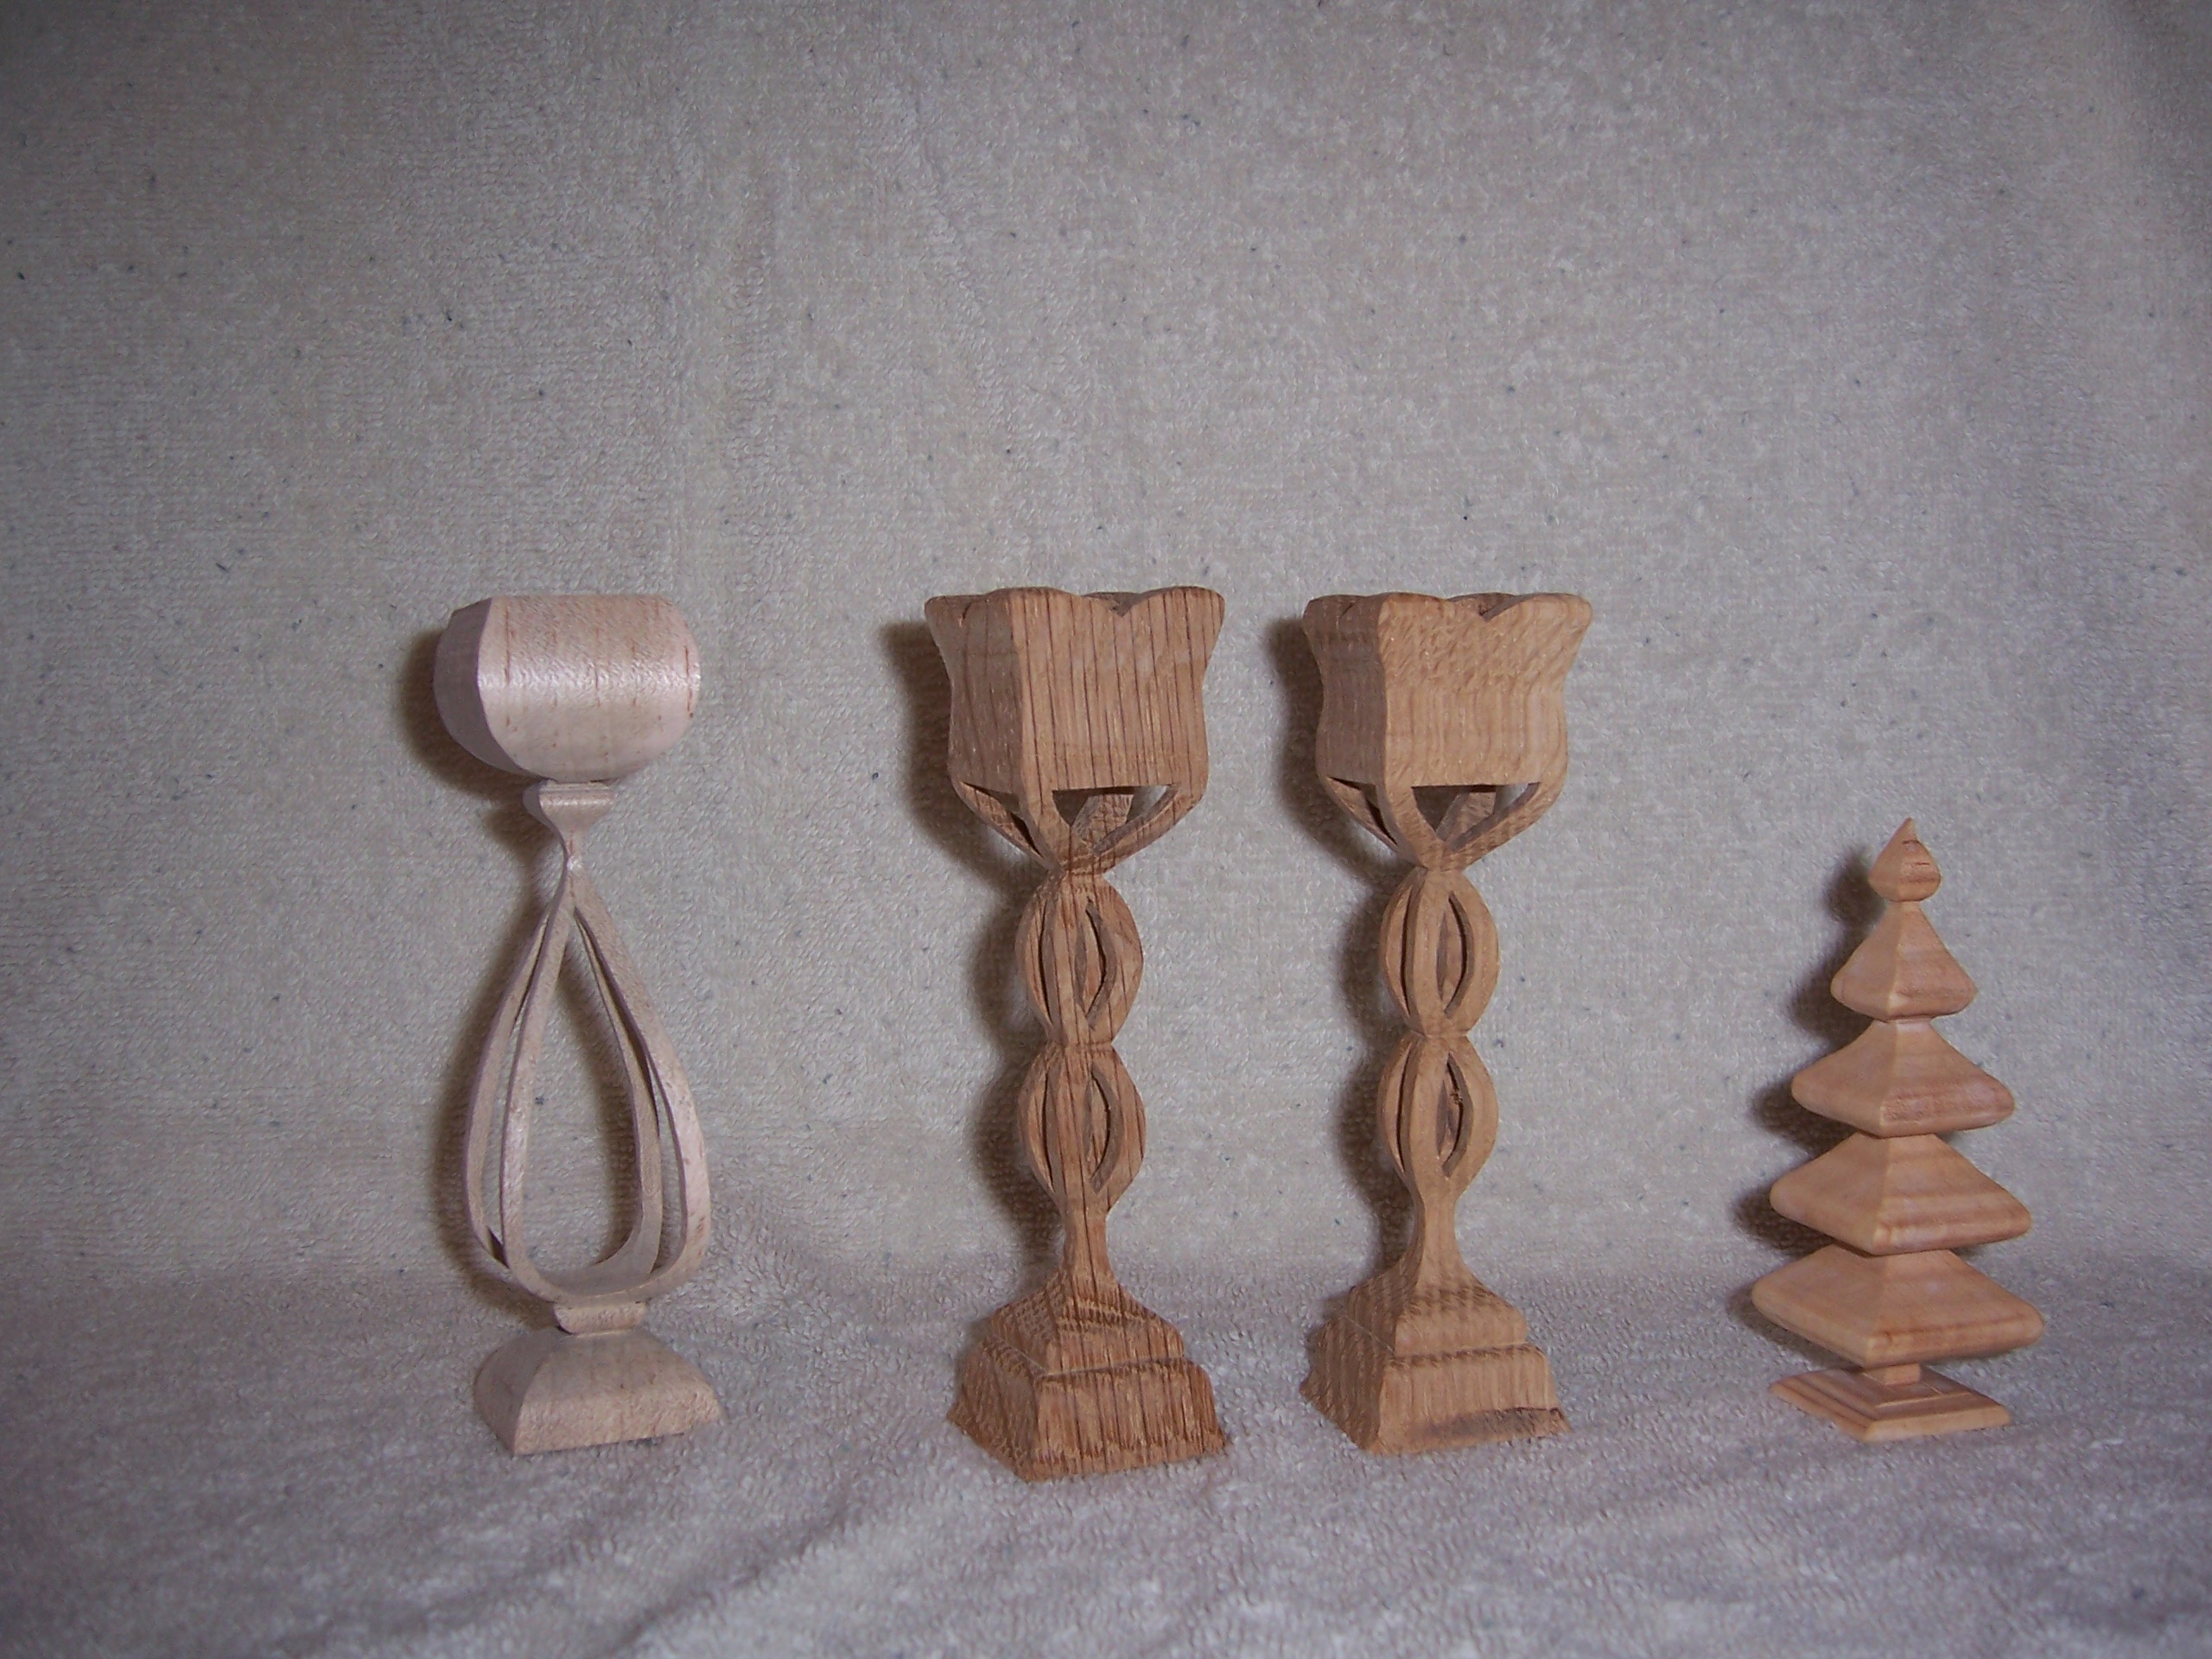 Candlesticks and tree